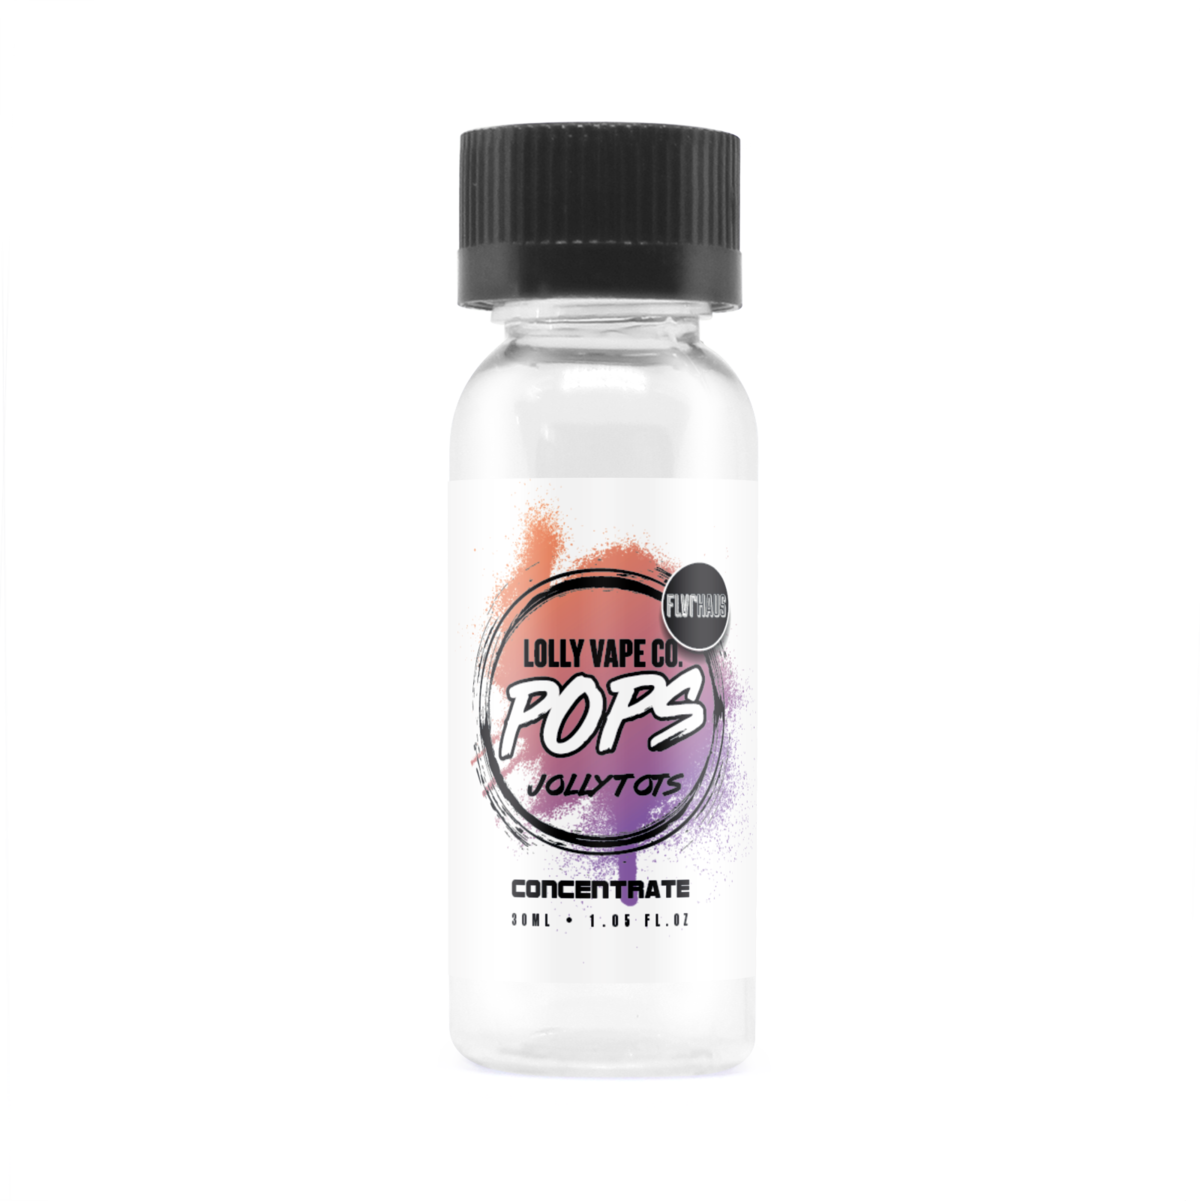 Jolly Tots Ice Concentrate E-liquid by Lolly Vape Co 30ml